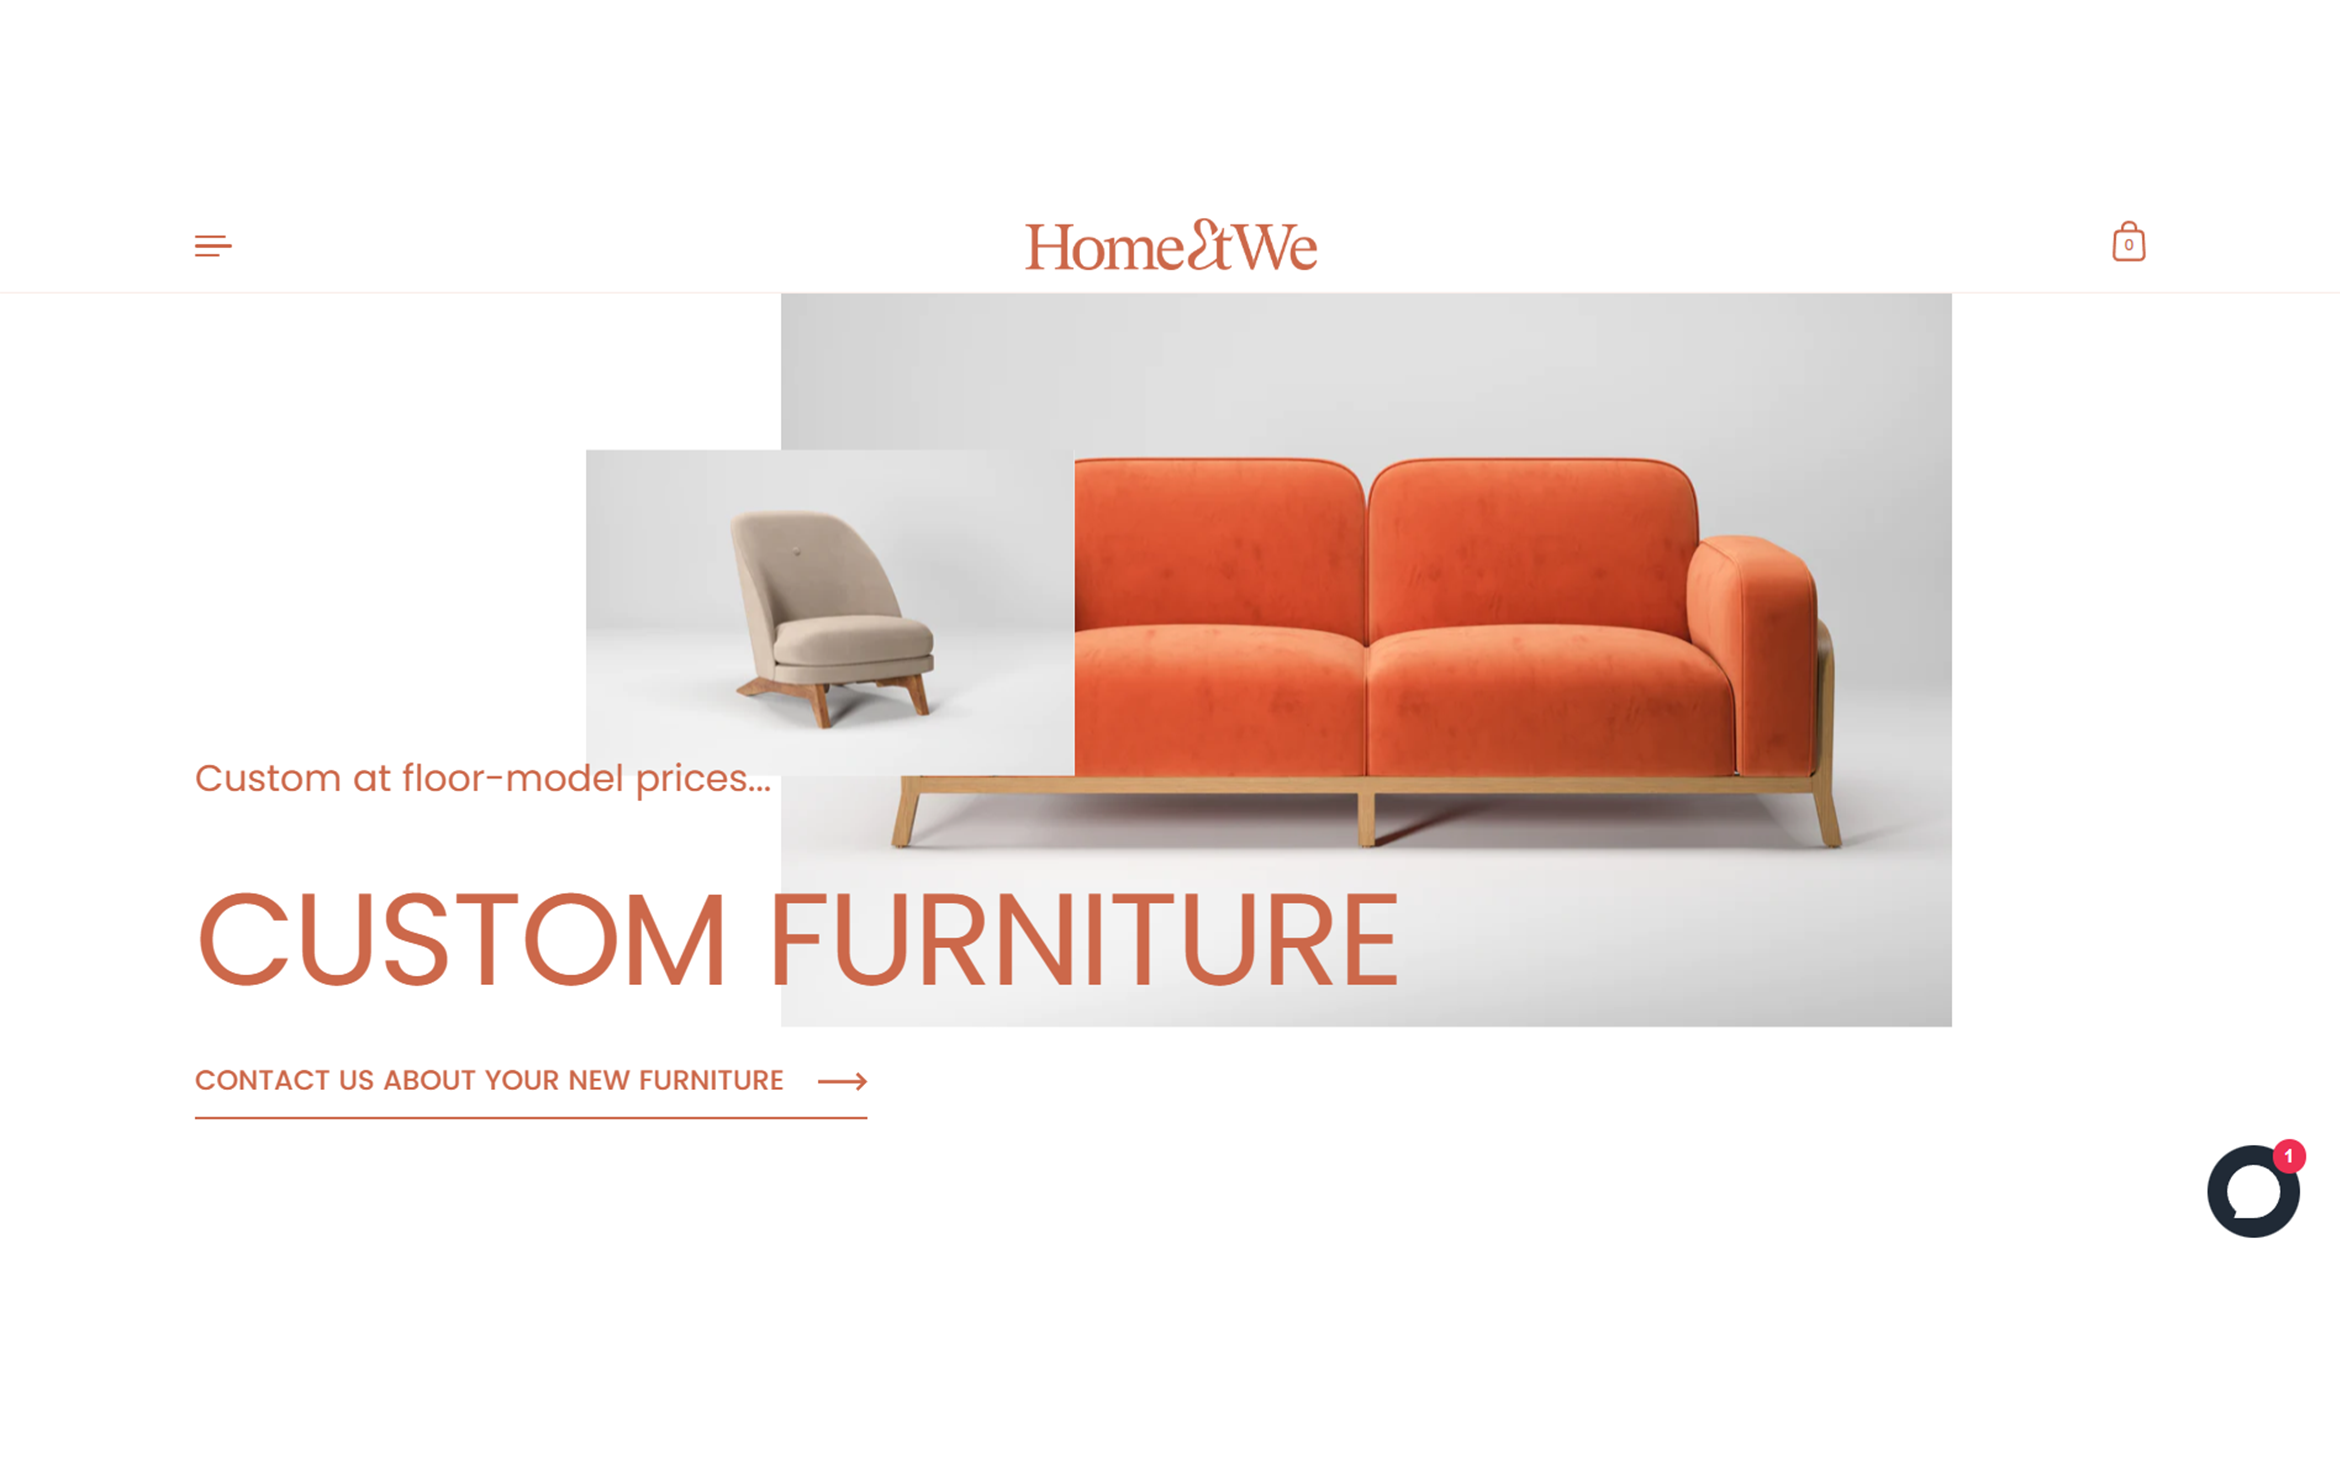 Furniture Renderings for an Online Store